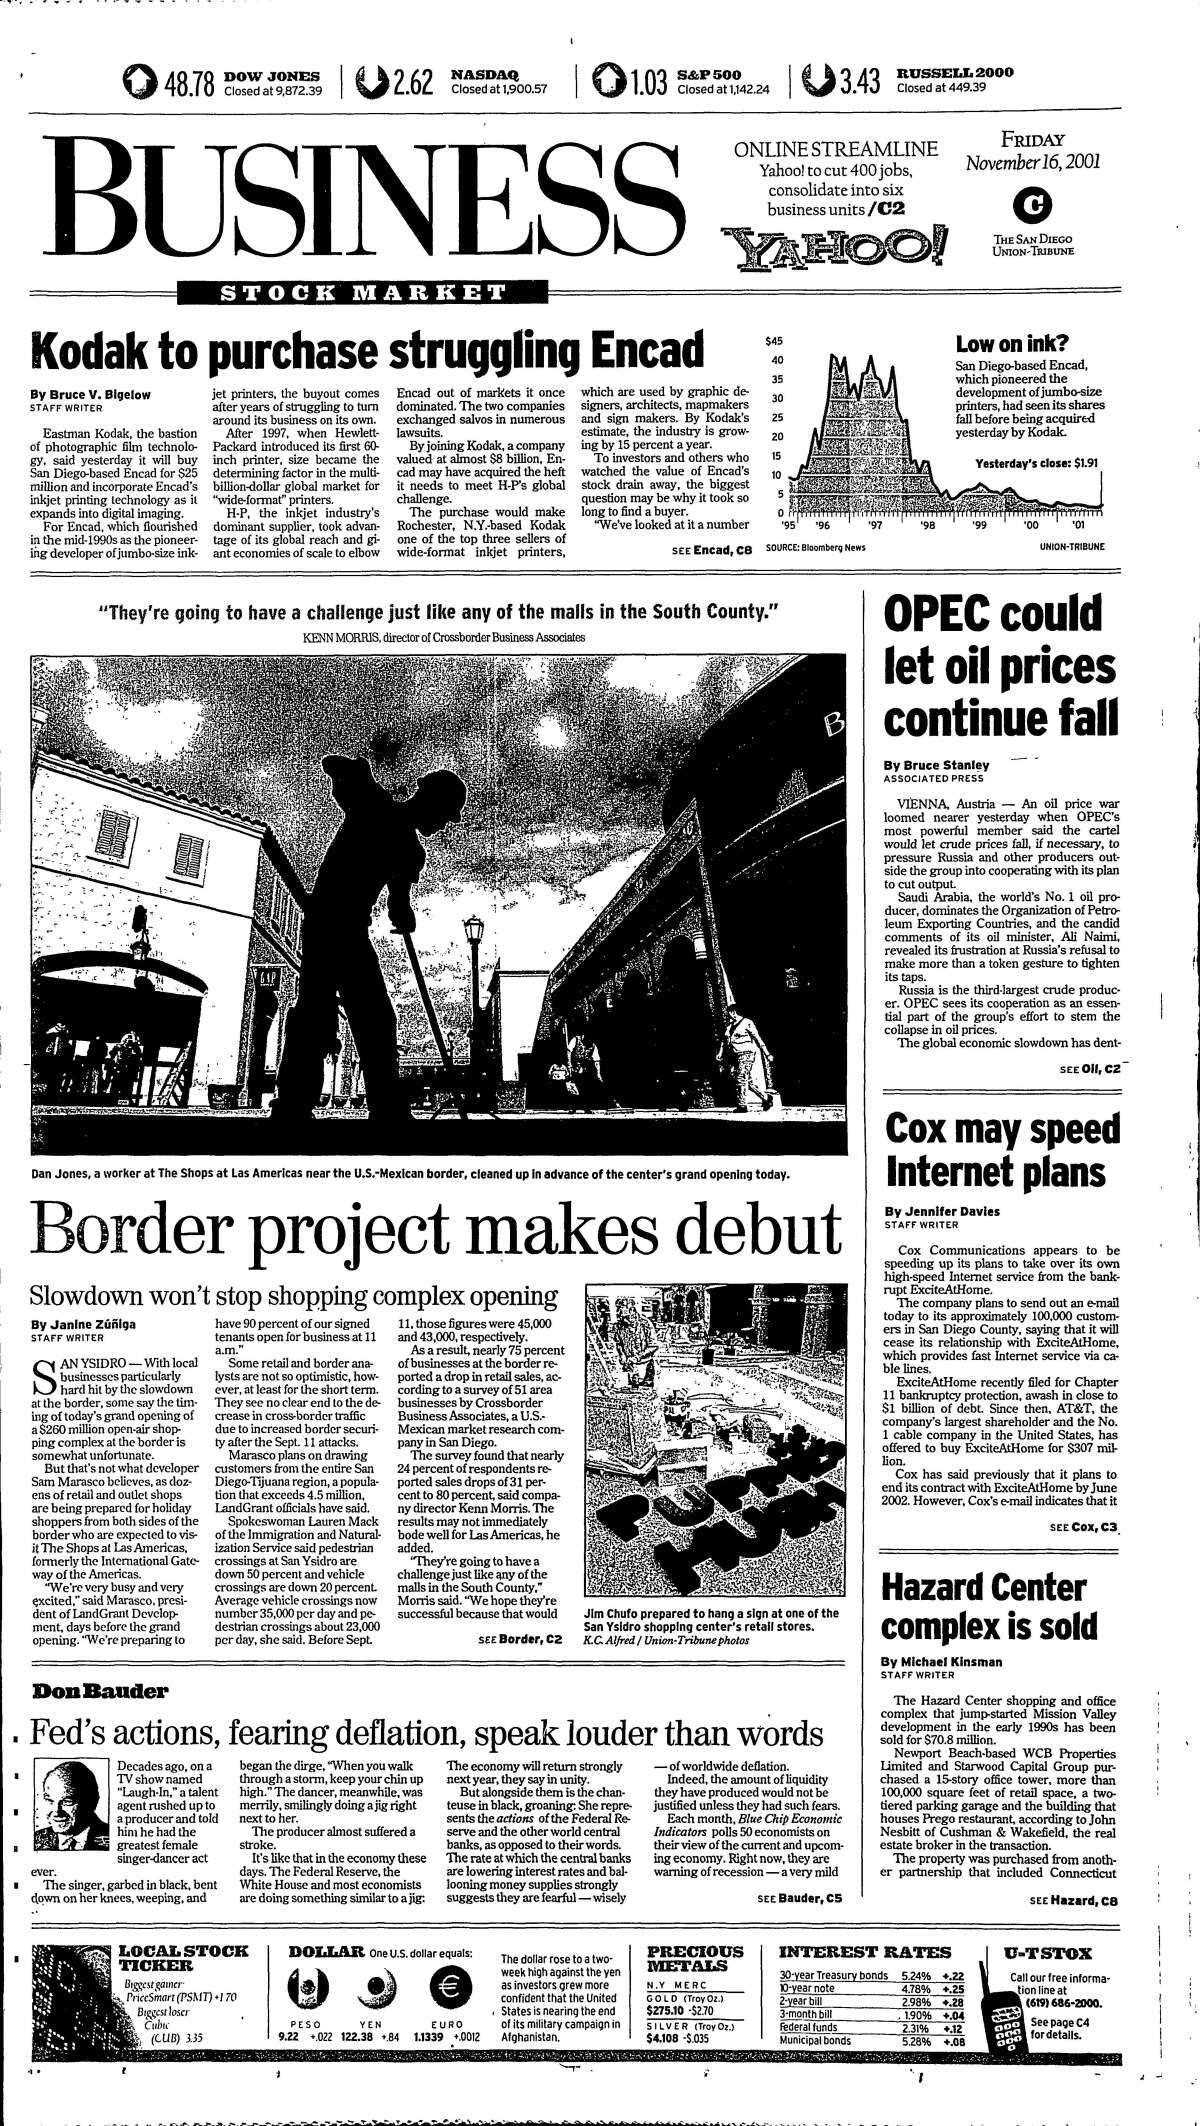 Front page of the Business section of The San Diego Union-Tribune, Nov. 16, 2001.